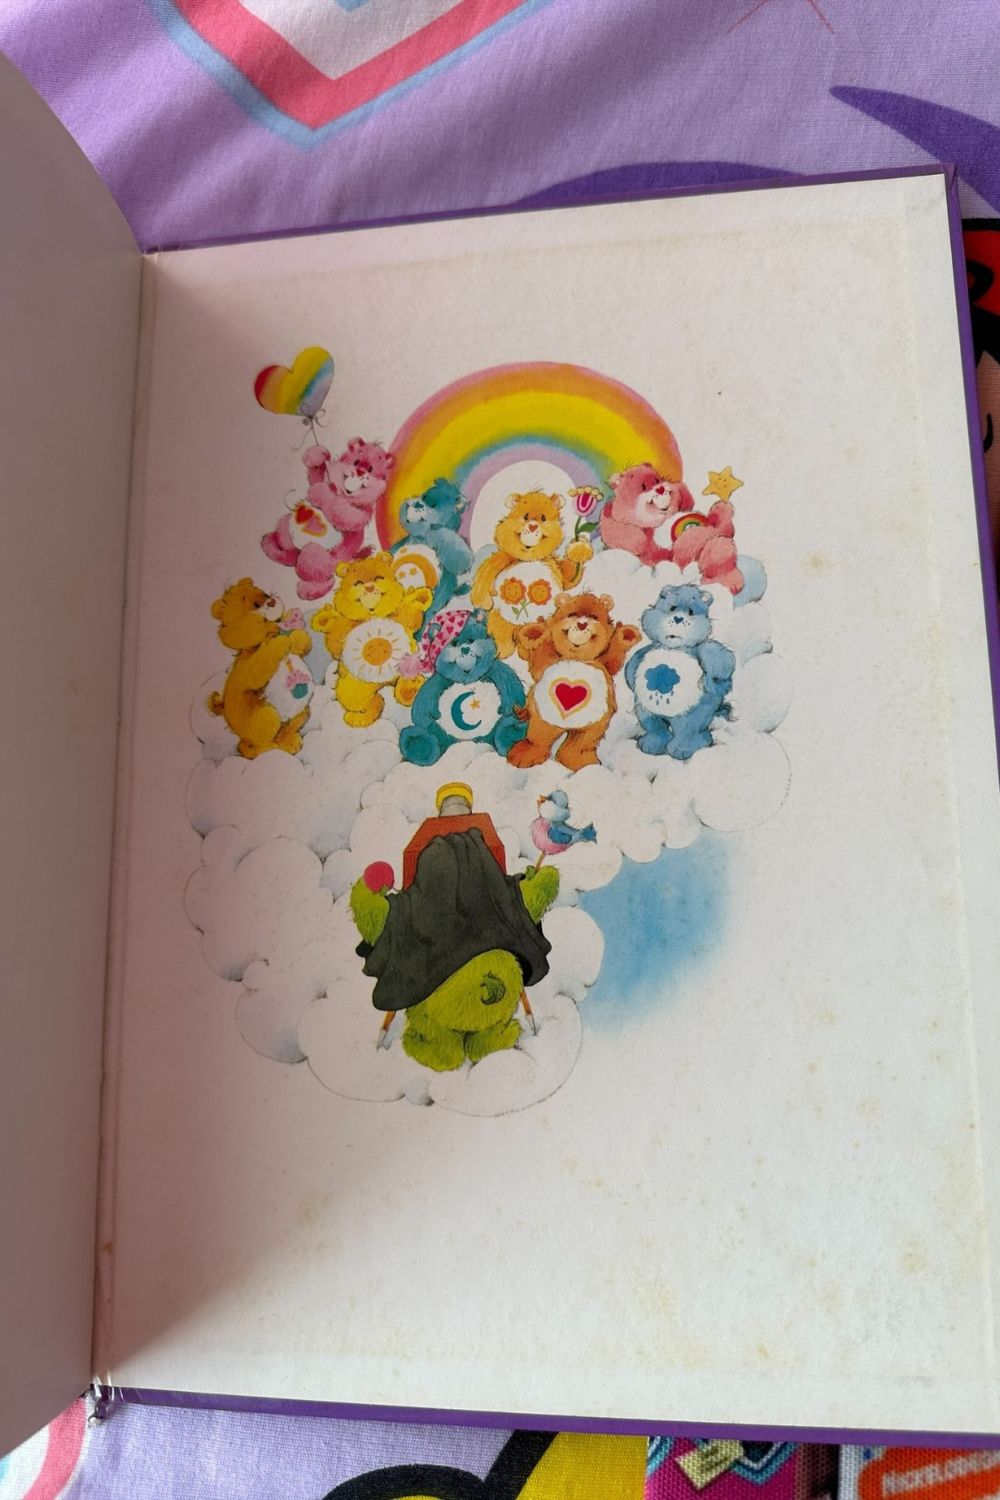 VINTAGE 1980'S CARE BEARS "YOUR BEST WISHES CAN COME TRUE" BOOK*